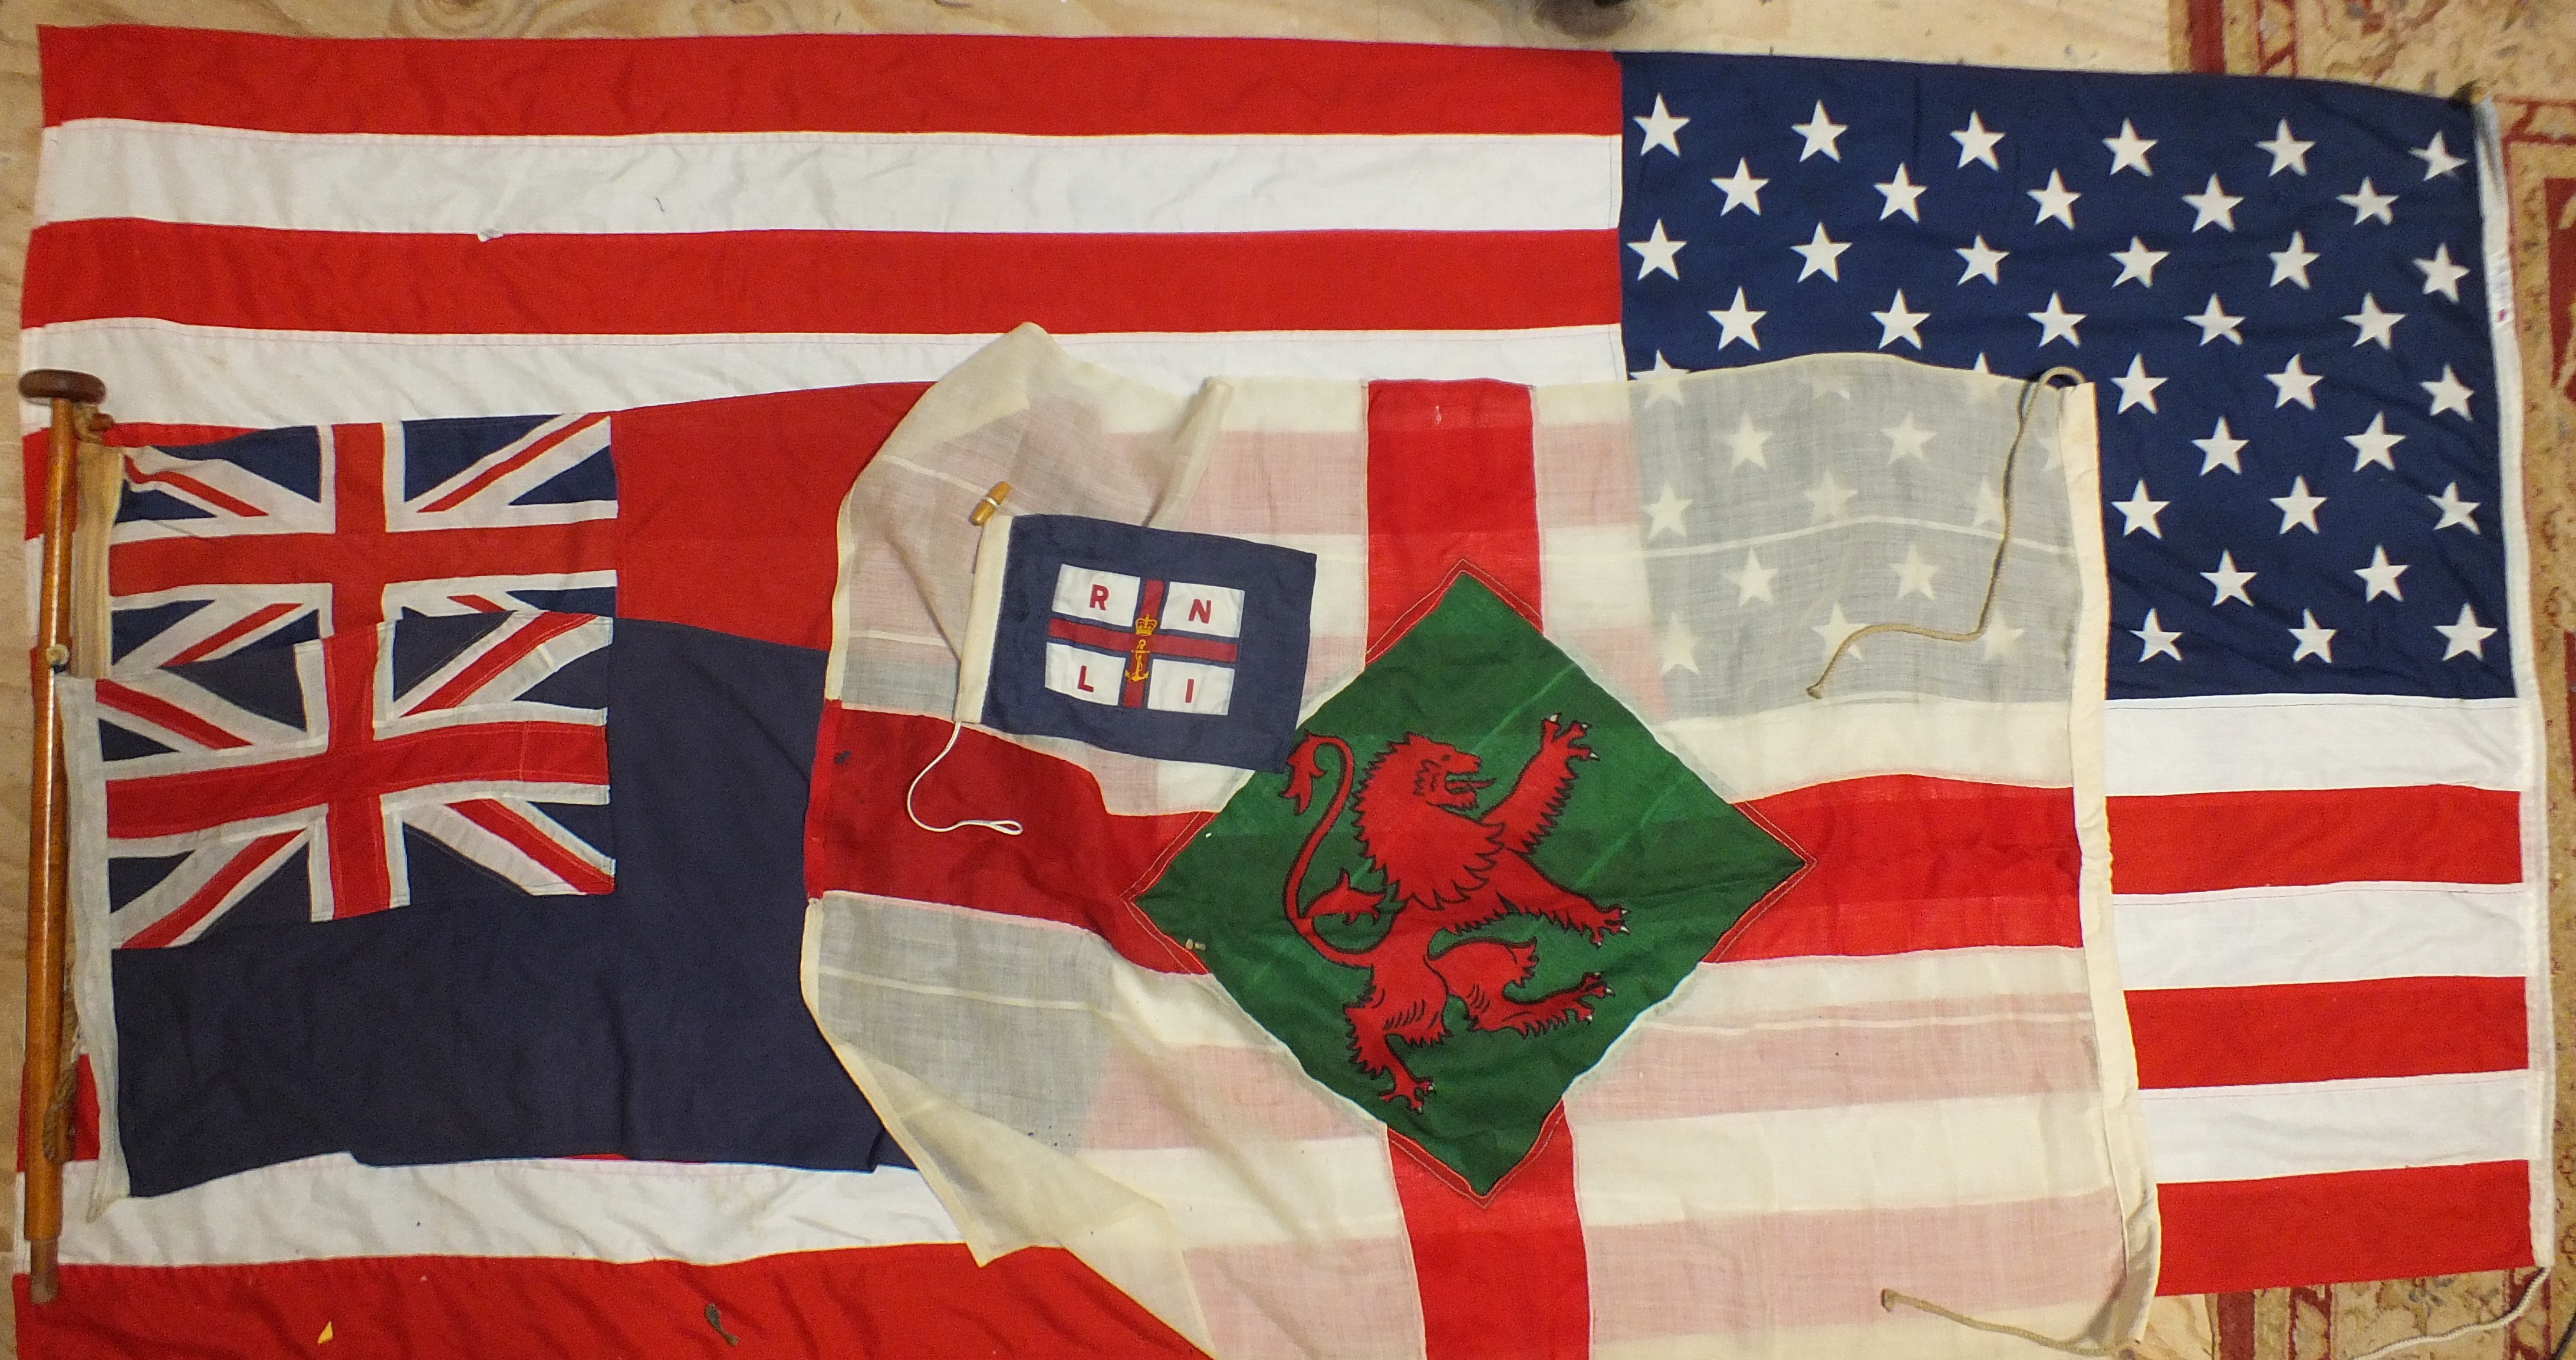 Flags: US Stars and Stripes, stitched, 288 x 109cm, Welsh dragon, 120 x 90cm, red ensign on short